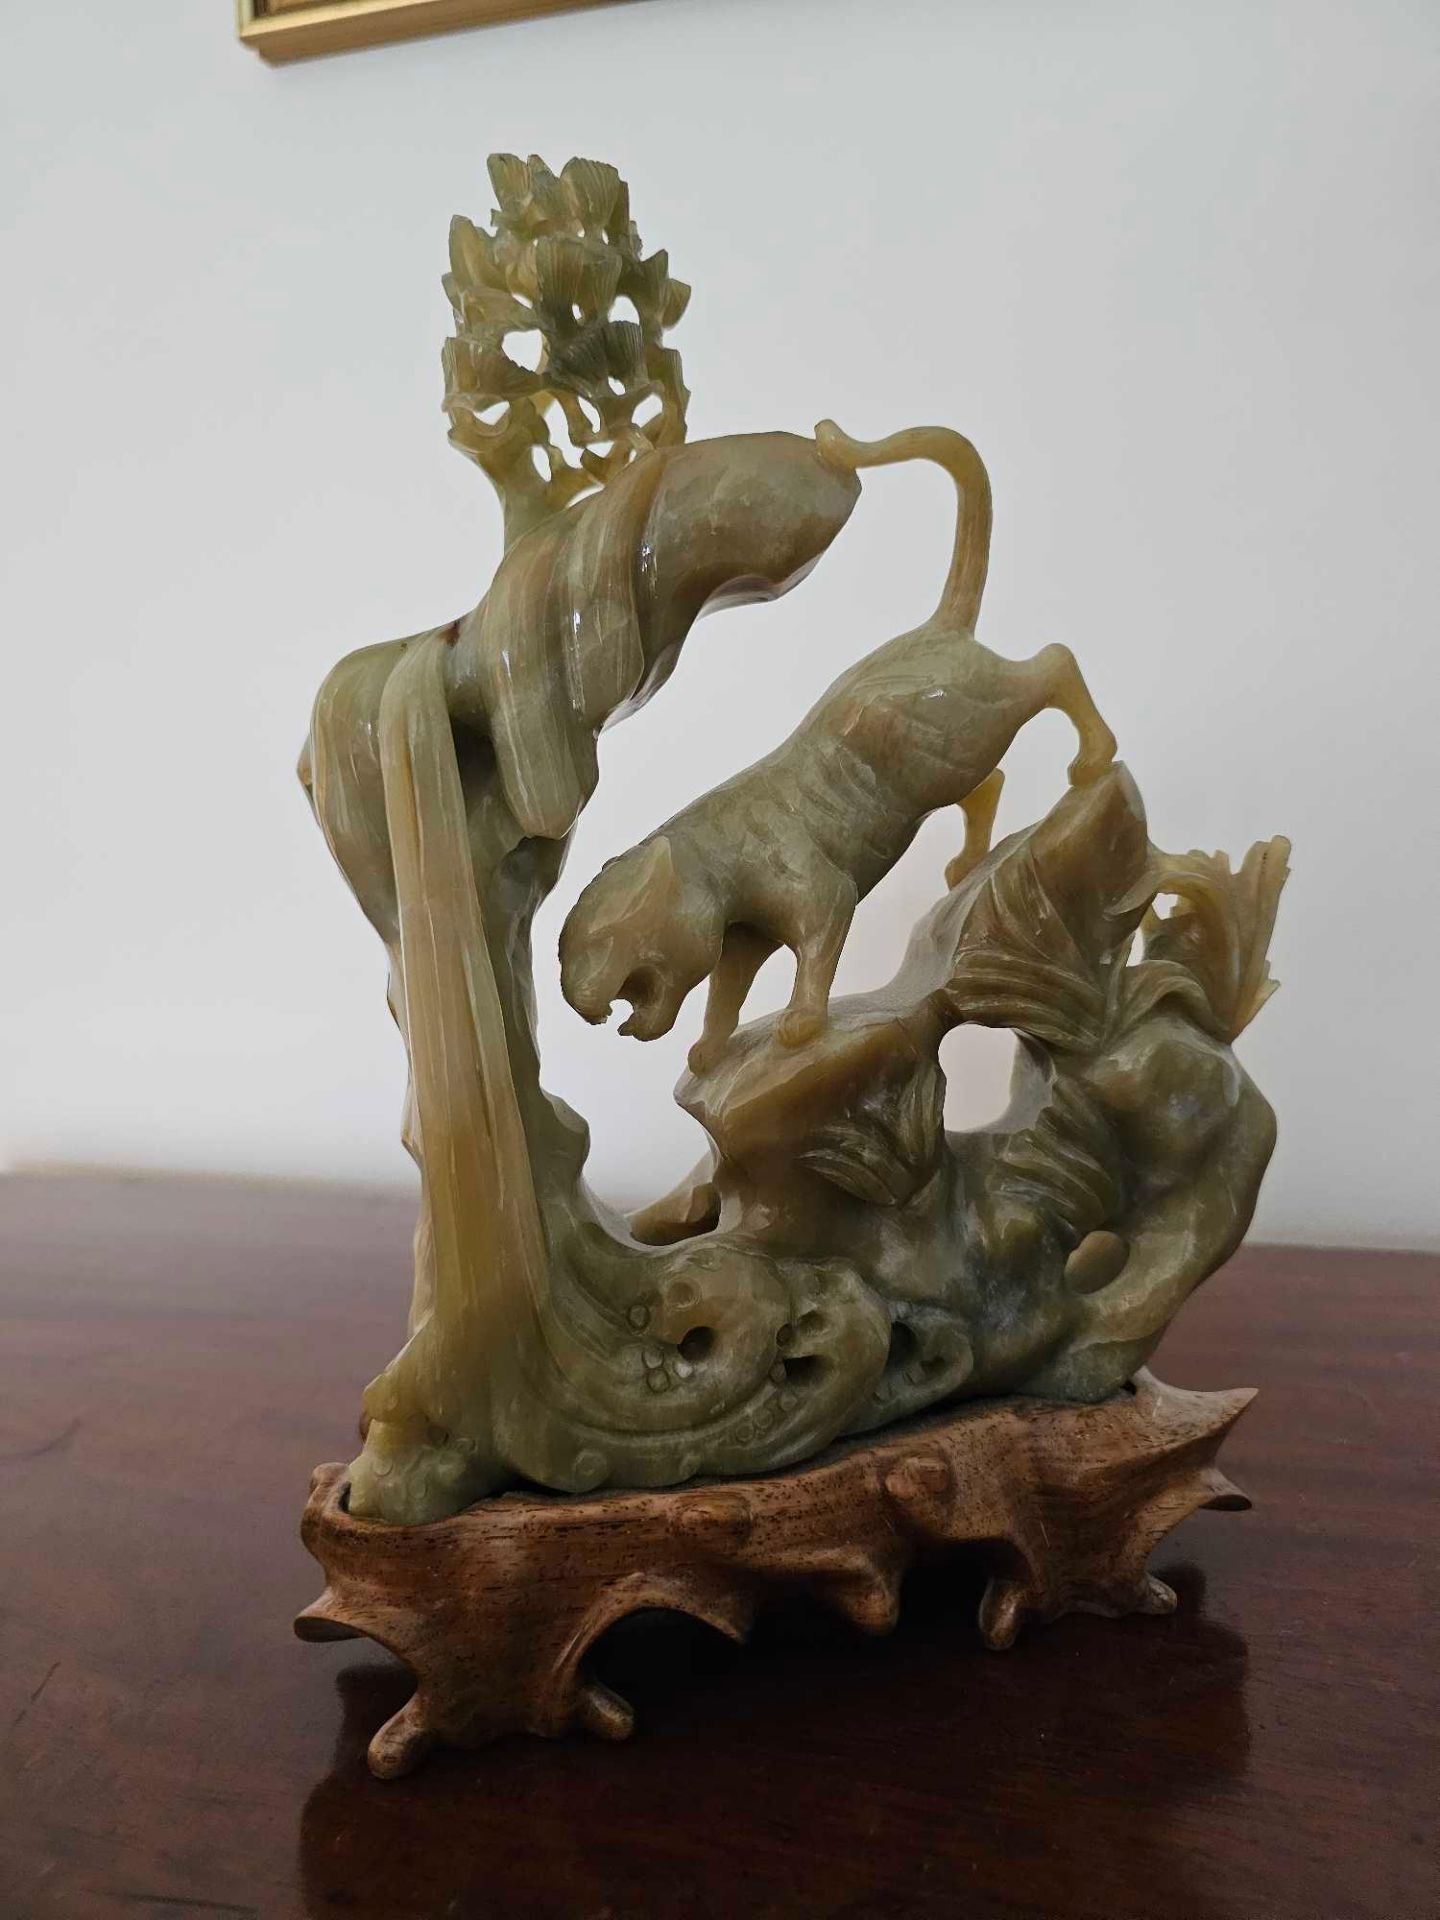 A Bowenite Or Nephrite (Serpentine) Which Is Often Called "New Jade" Figure Of A Tiger Beside A